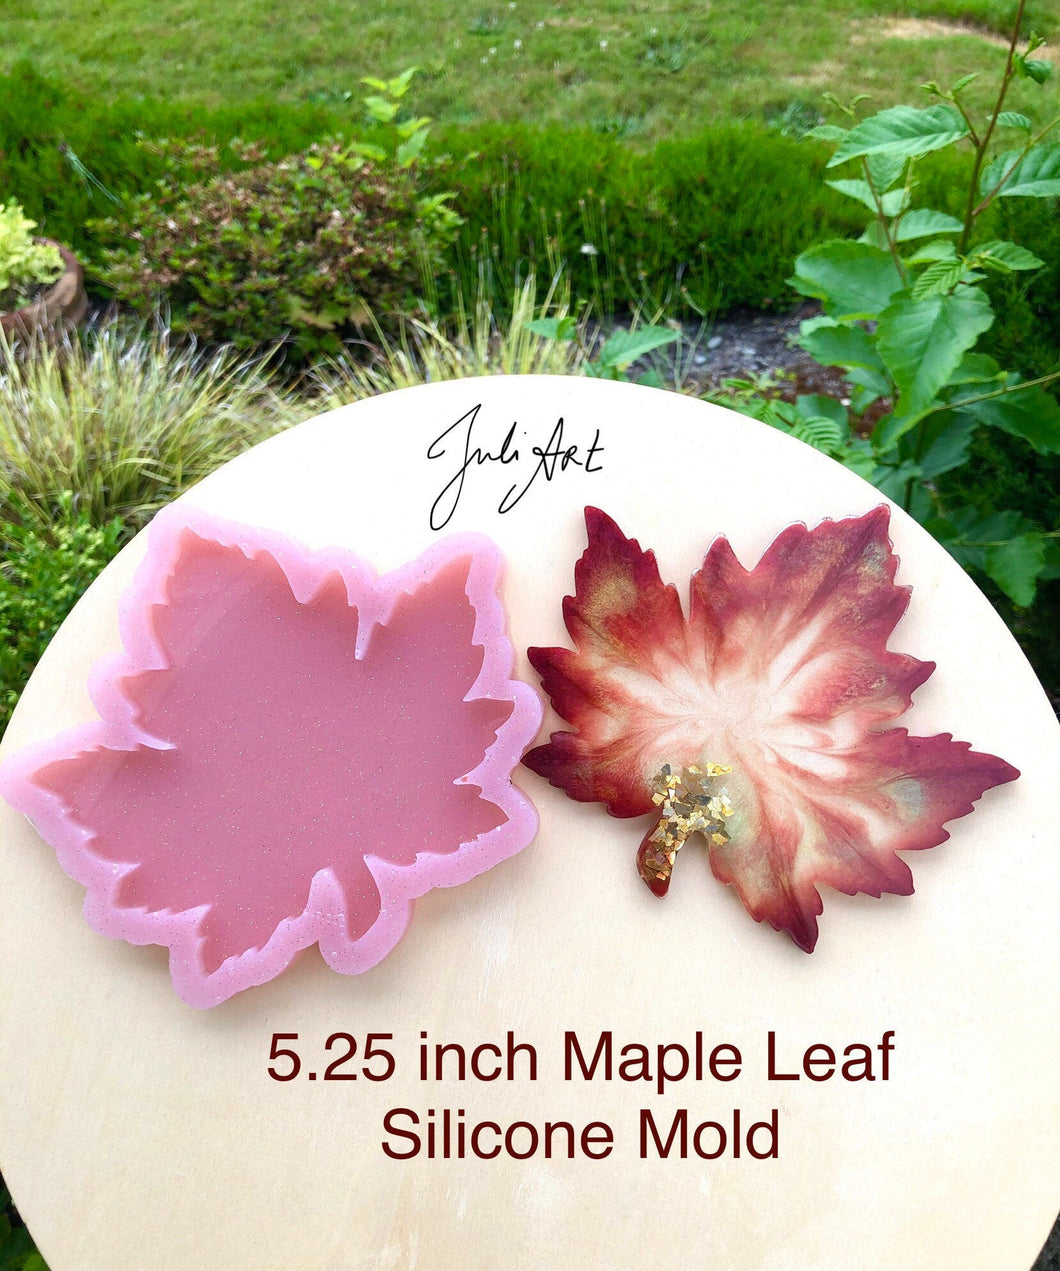 5.25 inch Maple Leaf Silicone Mold for Resin or Concrete Coasters